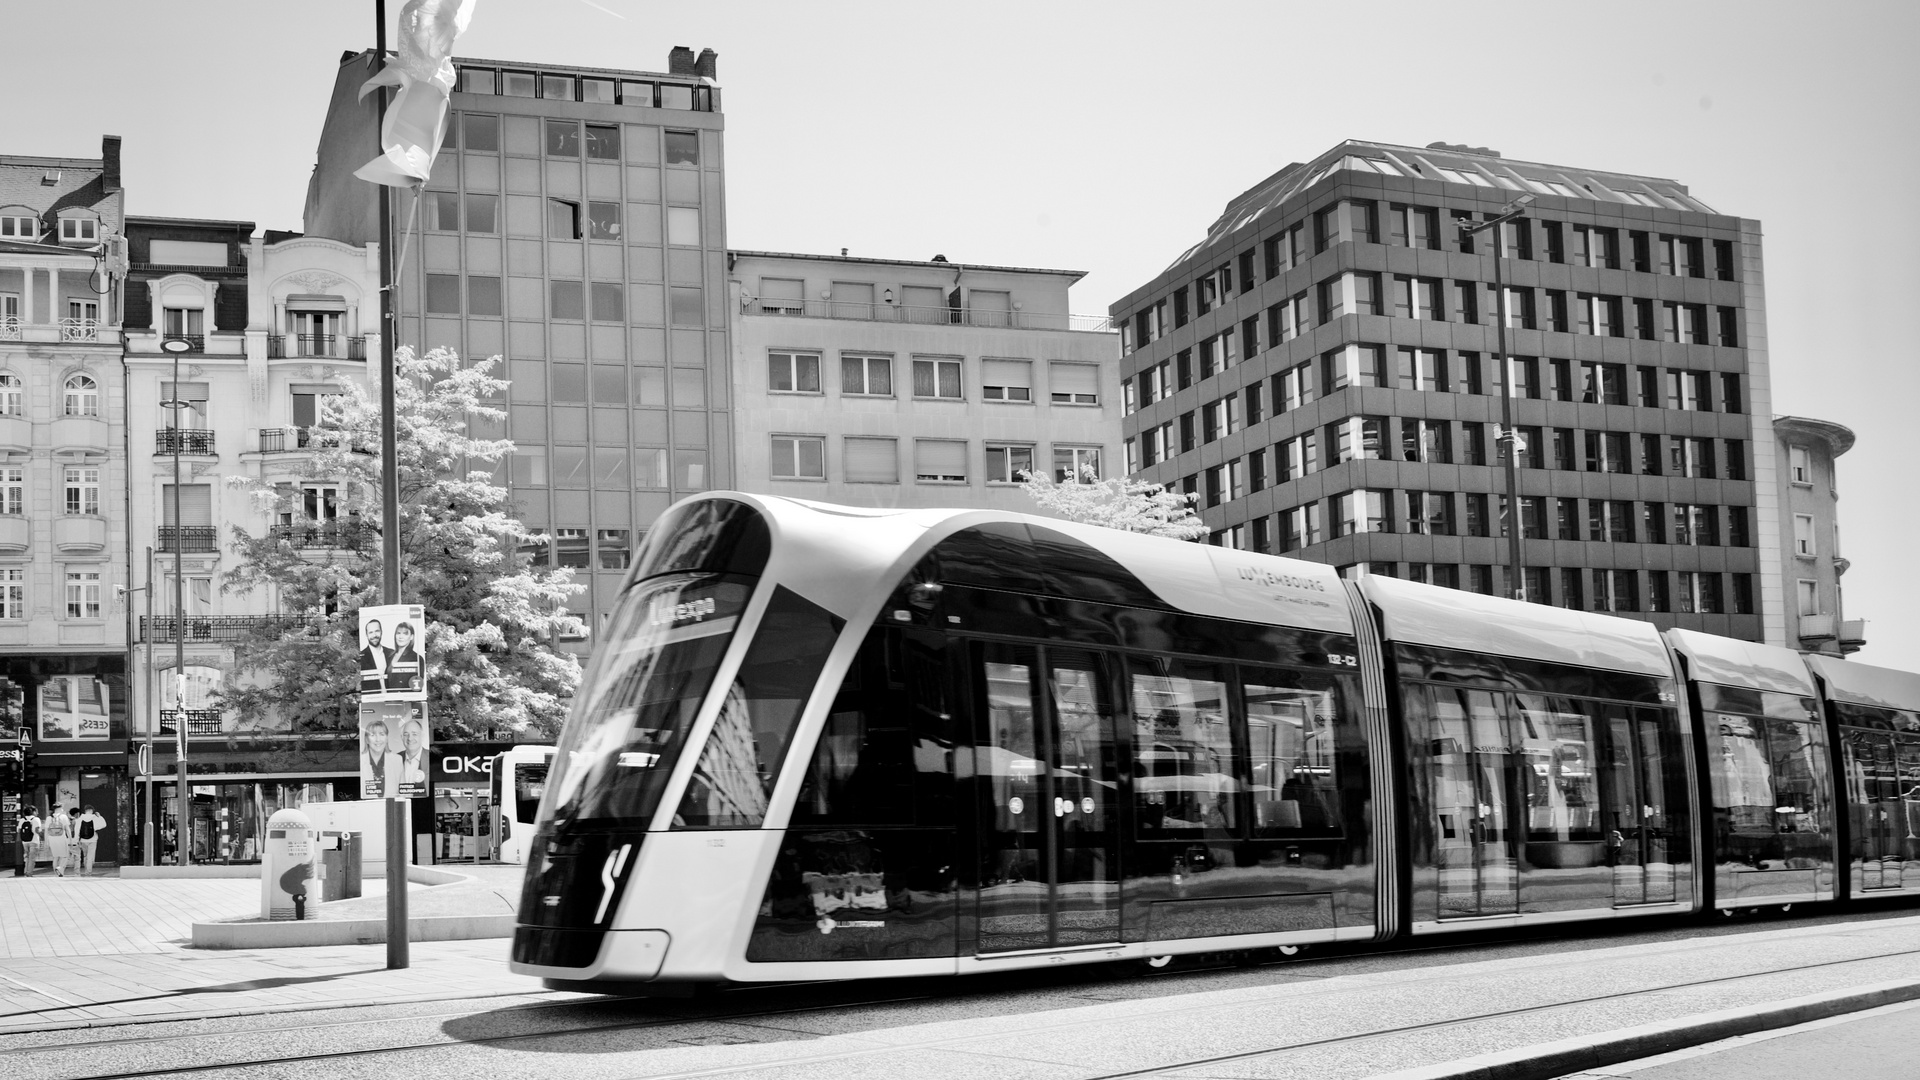 Tram in Luxembourg